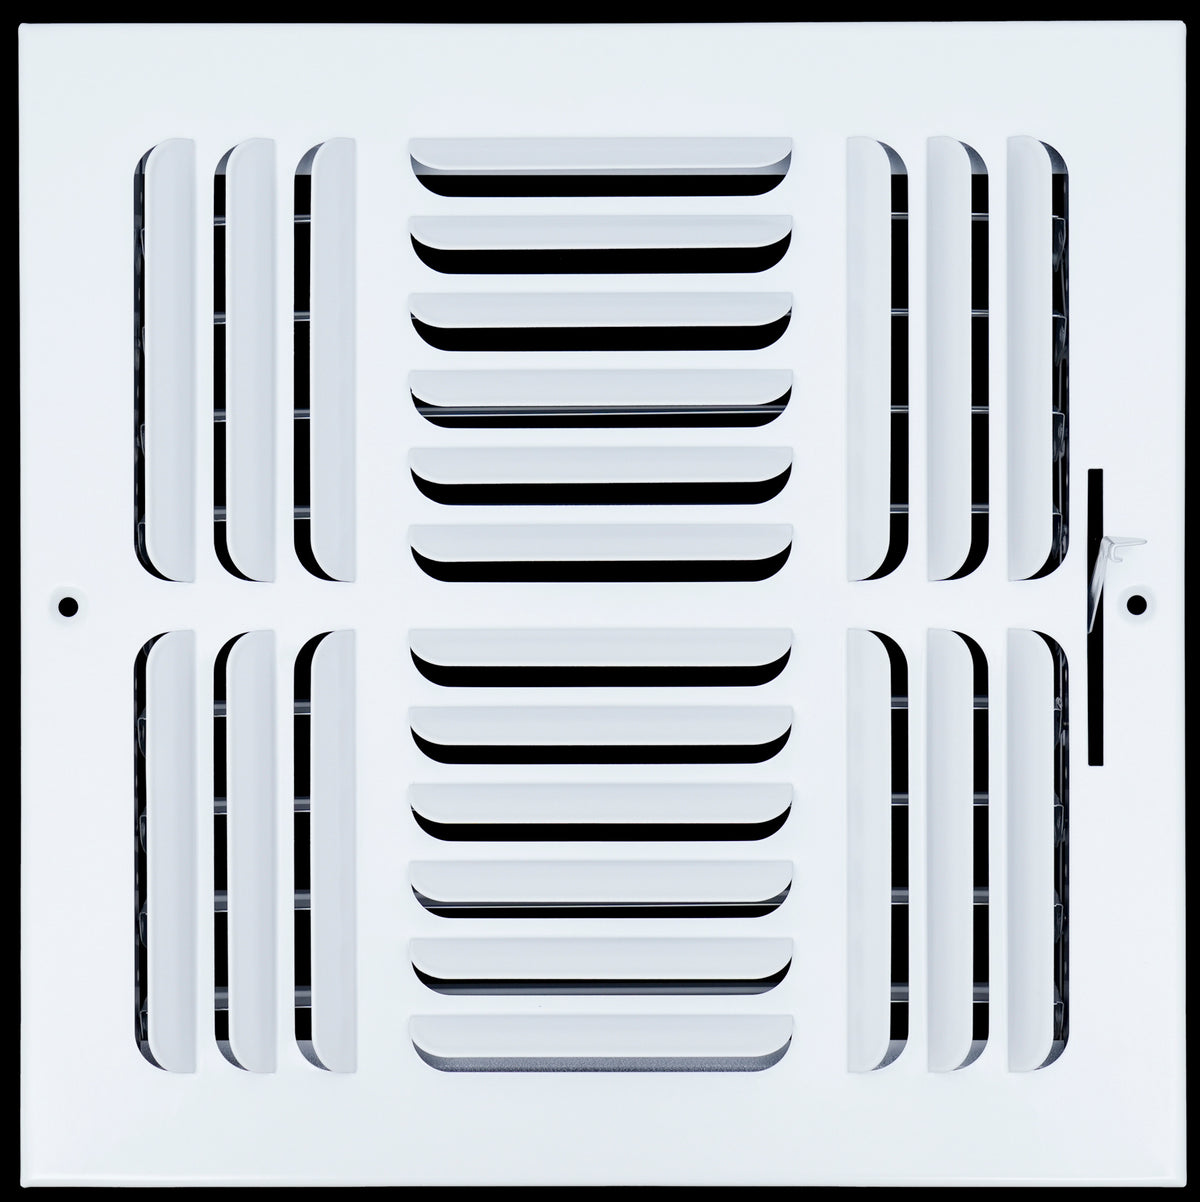 airgrilles 10"w x 10"h 3 way fixed curved blade air supply diffuser  -  register vent cover grill for sidewall and ceiling  -  white  -  outer dimensions: 11.75"w x 11.75"h hnd-cb-wh-3way-10x10  - 1